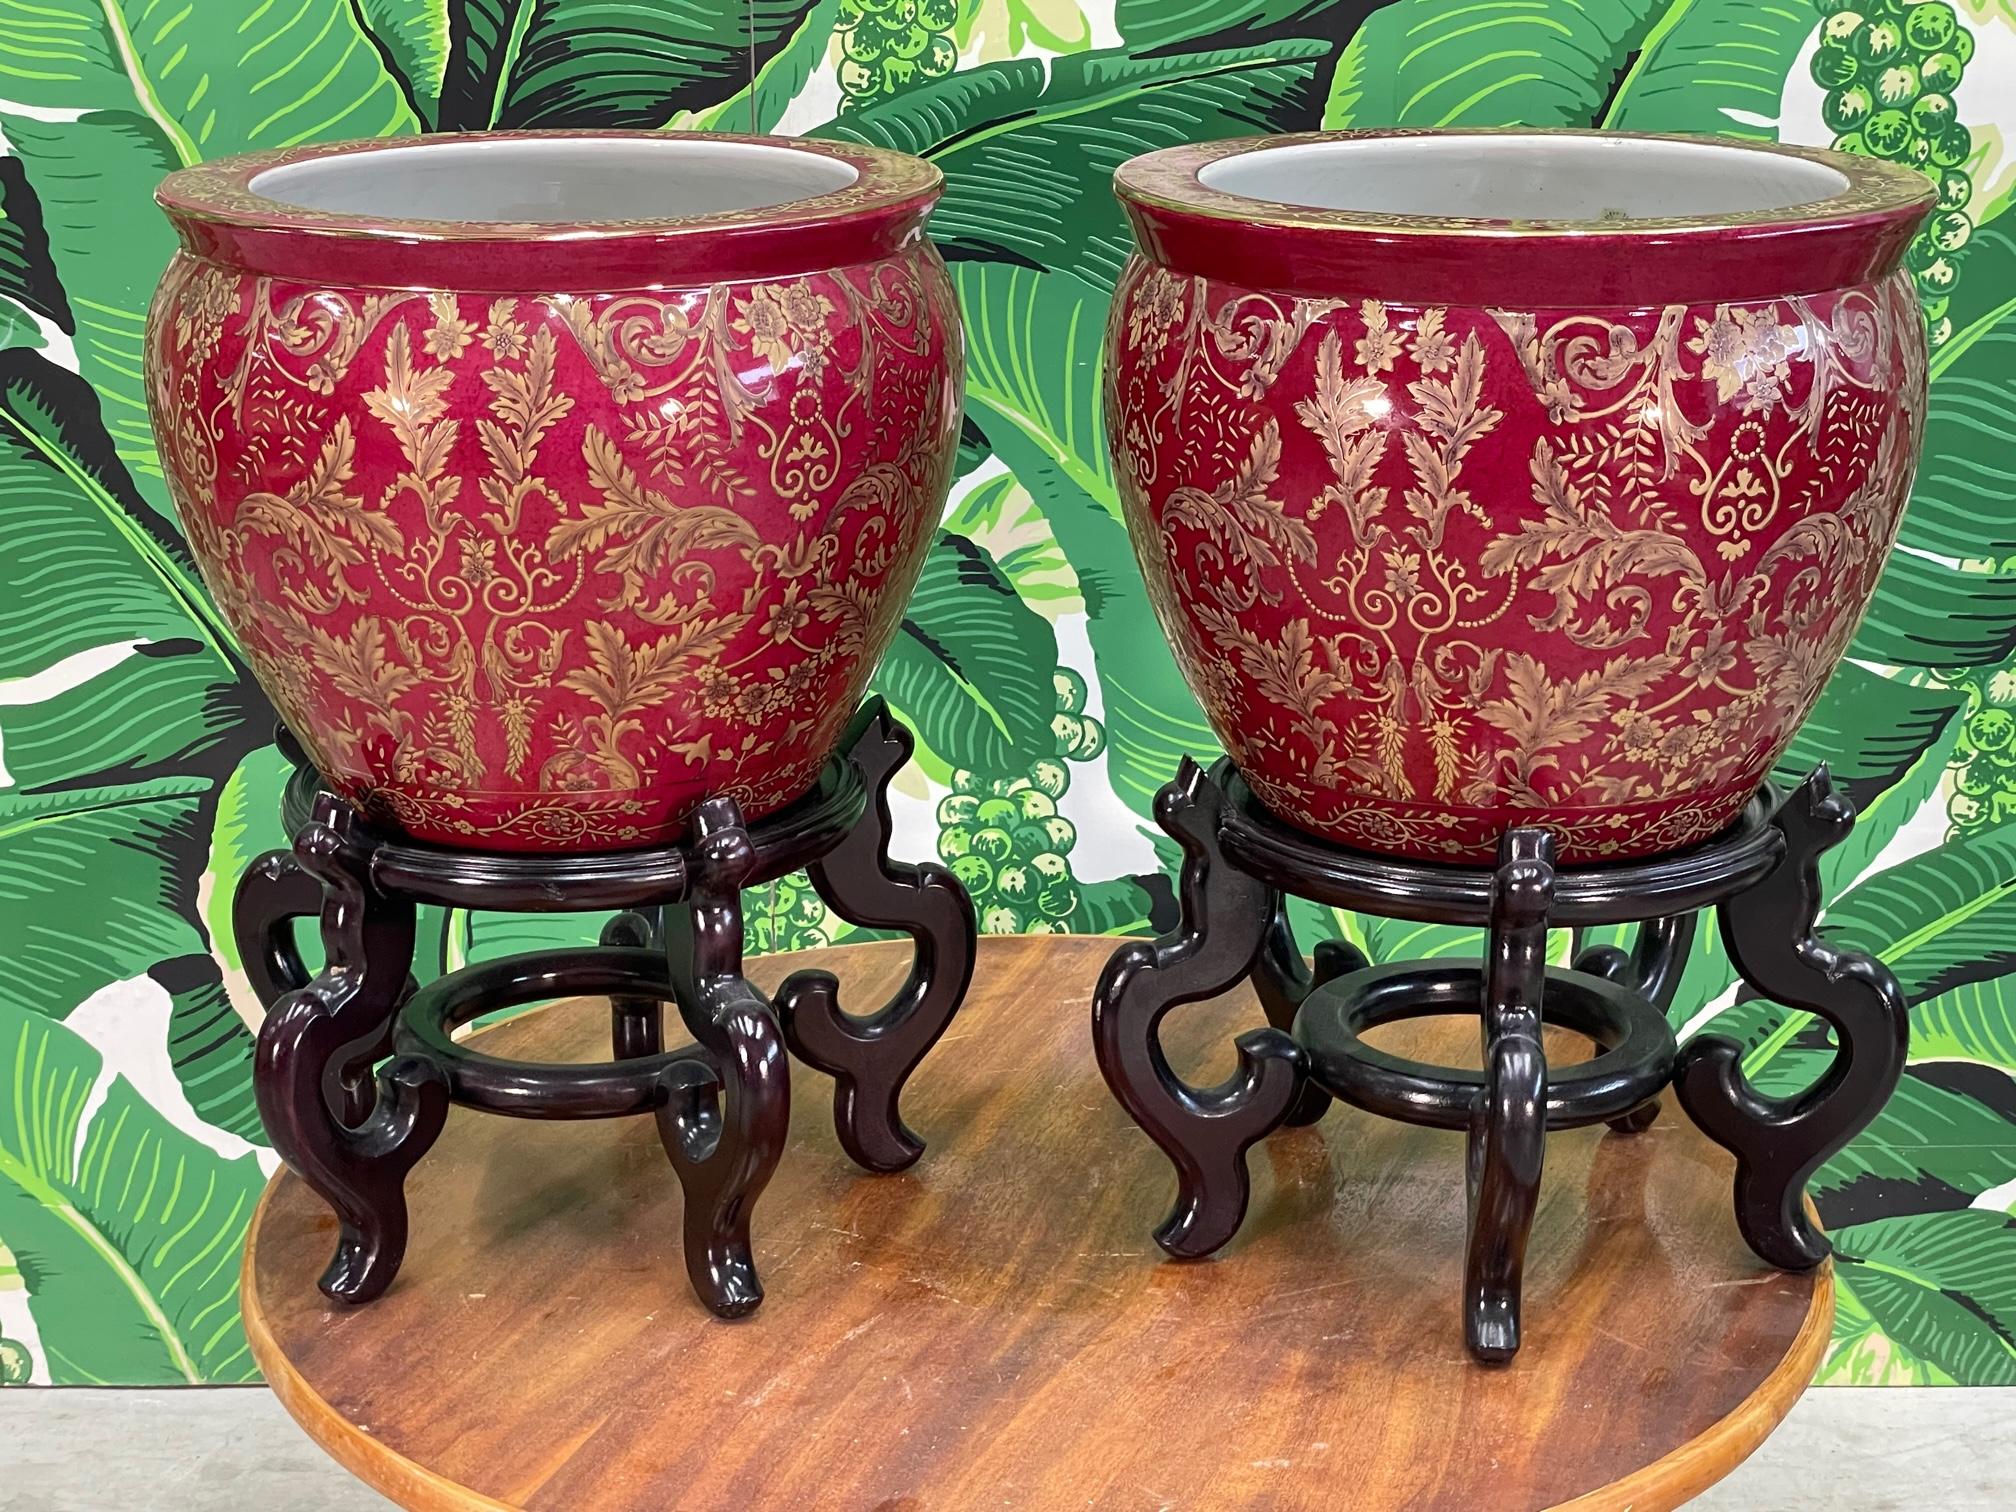 Pair of large Asian ceramic planters on wood stands feature hand painted acanthus leaves and flowers as well as fish and underwater foliage on the inside of the pot. Good condition with no chips or cracks. Possible minor imperfections consistent